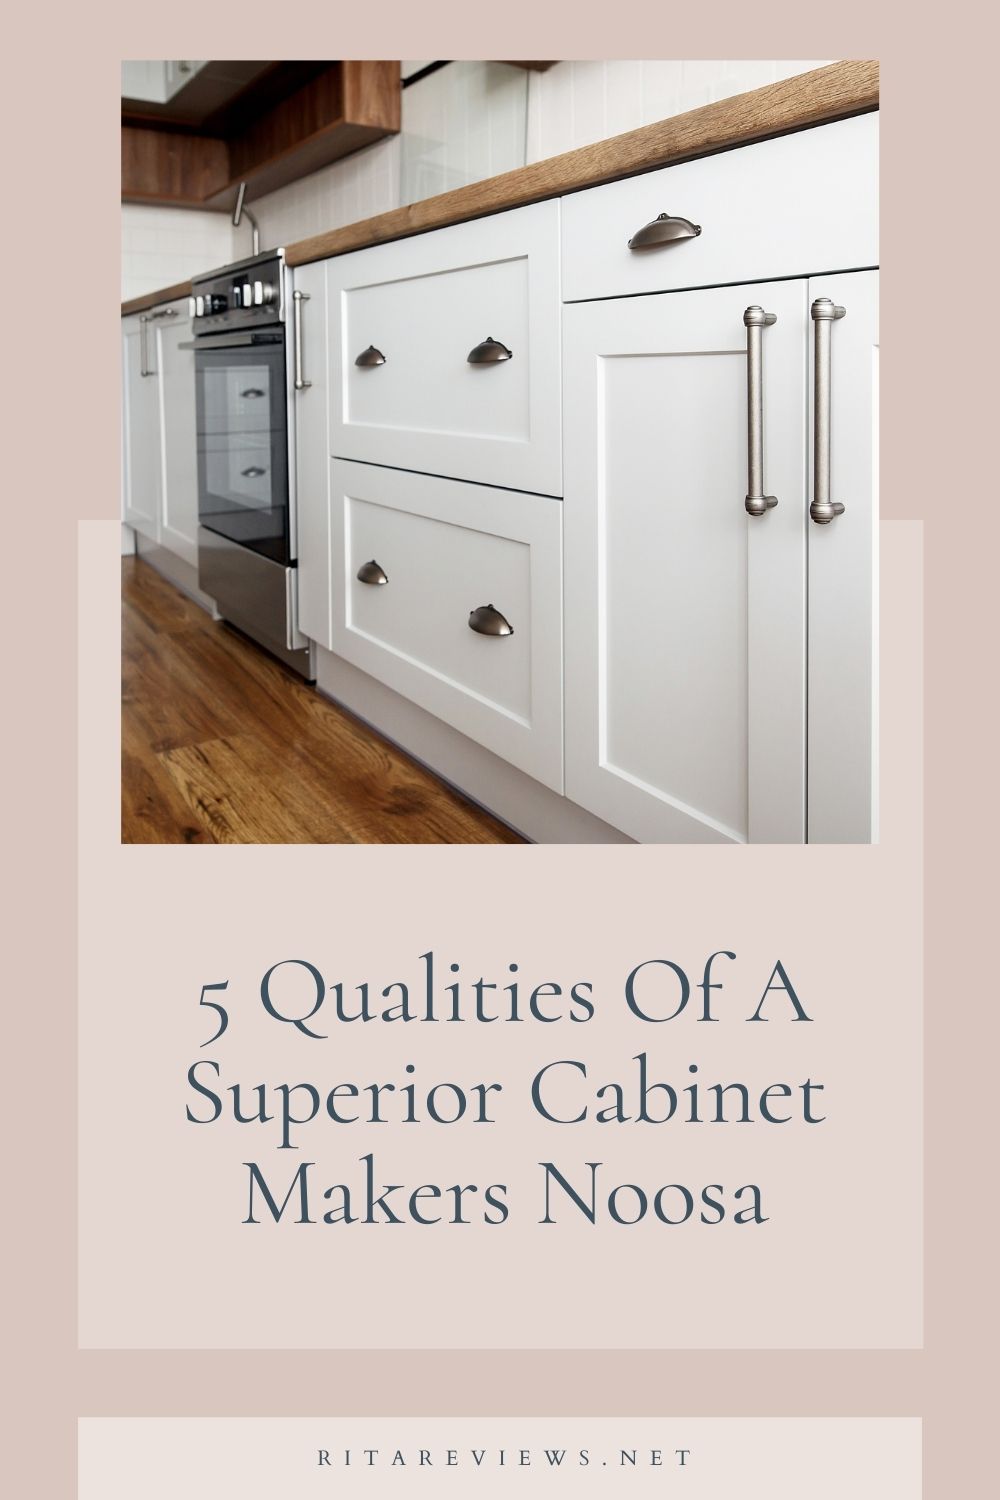 5 Qualities Of A Superior Cabinet Makers Noosa